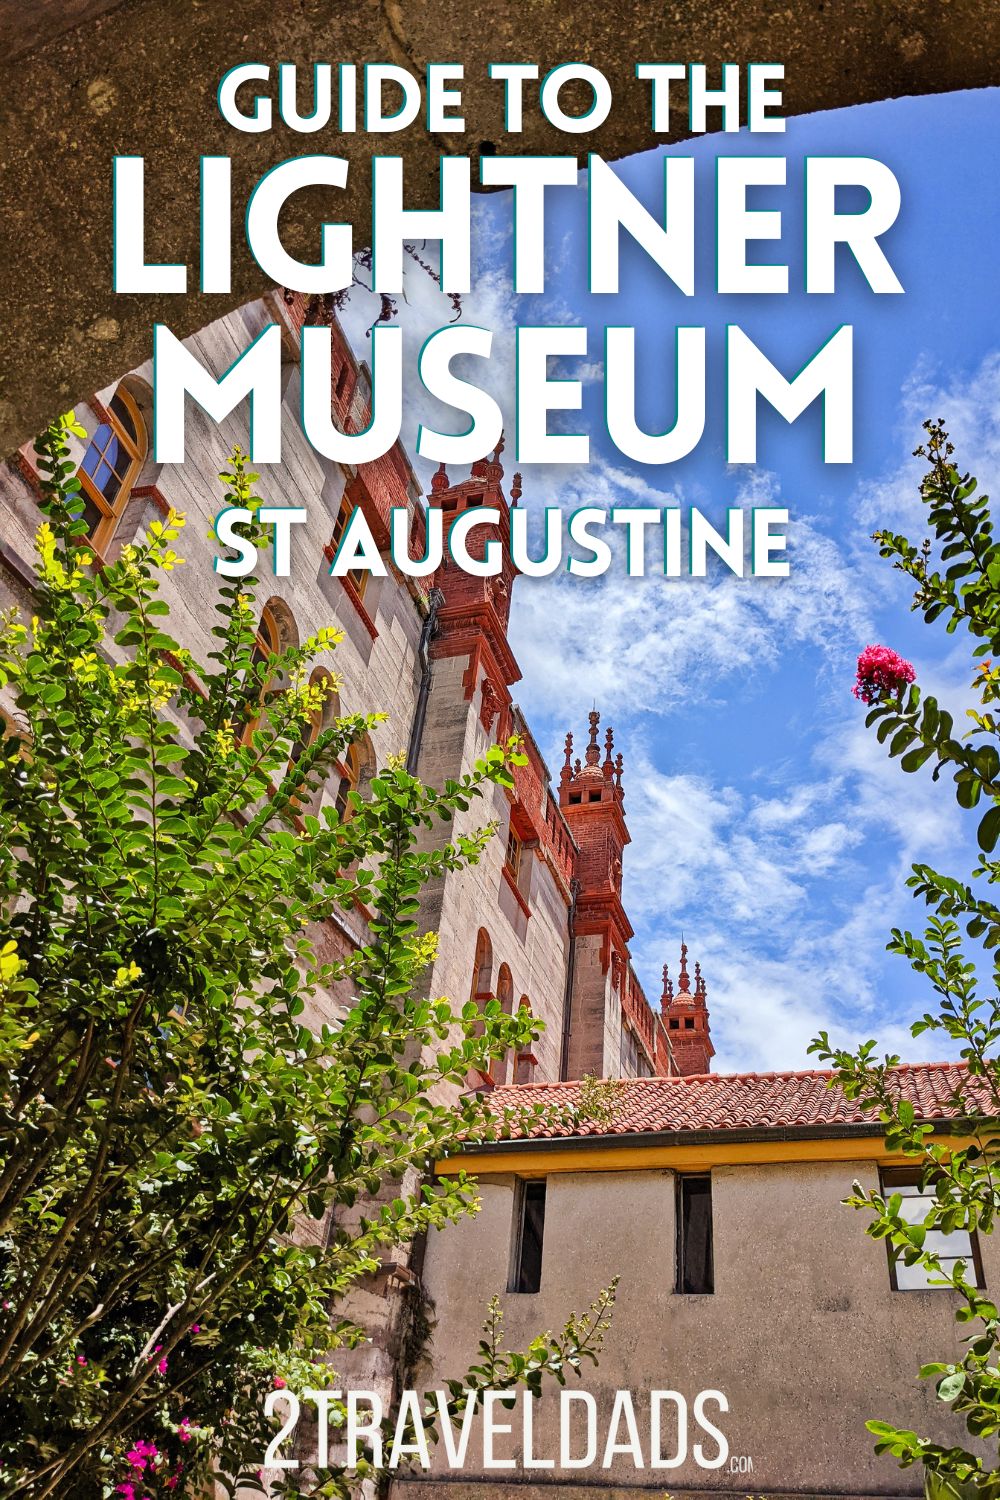 St Augustine's Lightner Museum is a must-visit spot in downtown. With fine art collections, historic exhibits and even a café in the old swimming pool, it's one of the most unique museums in Florida.